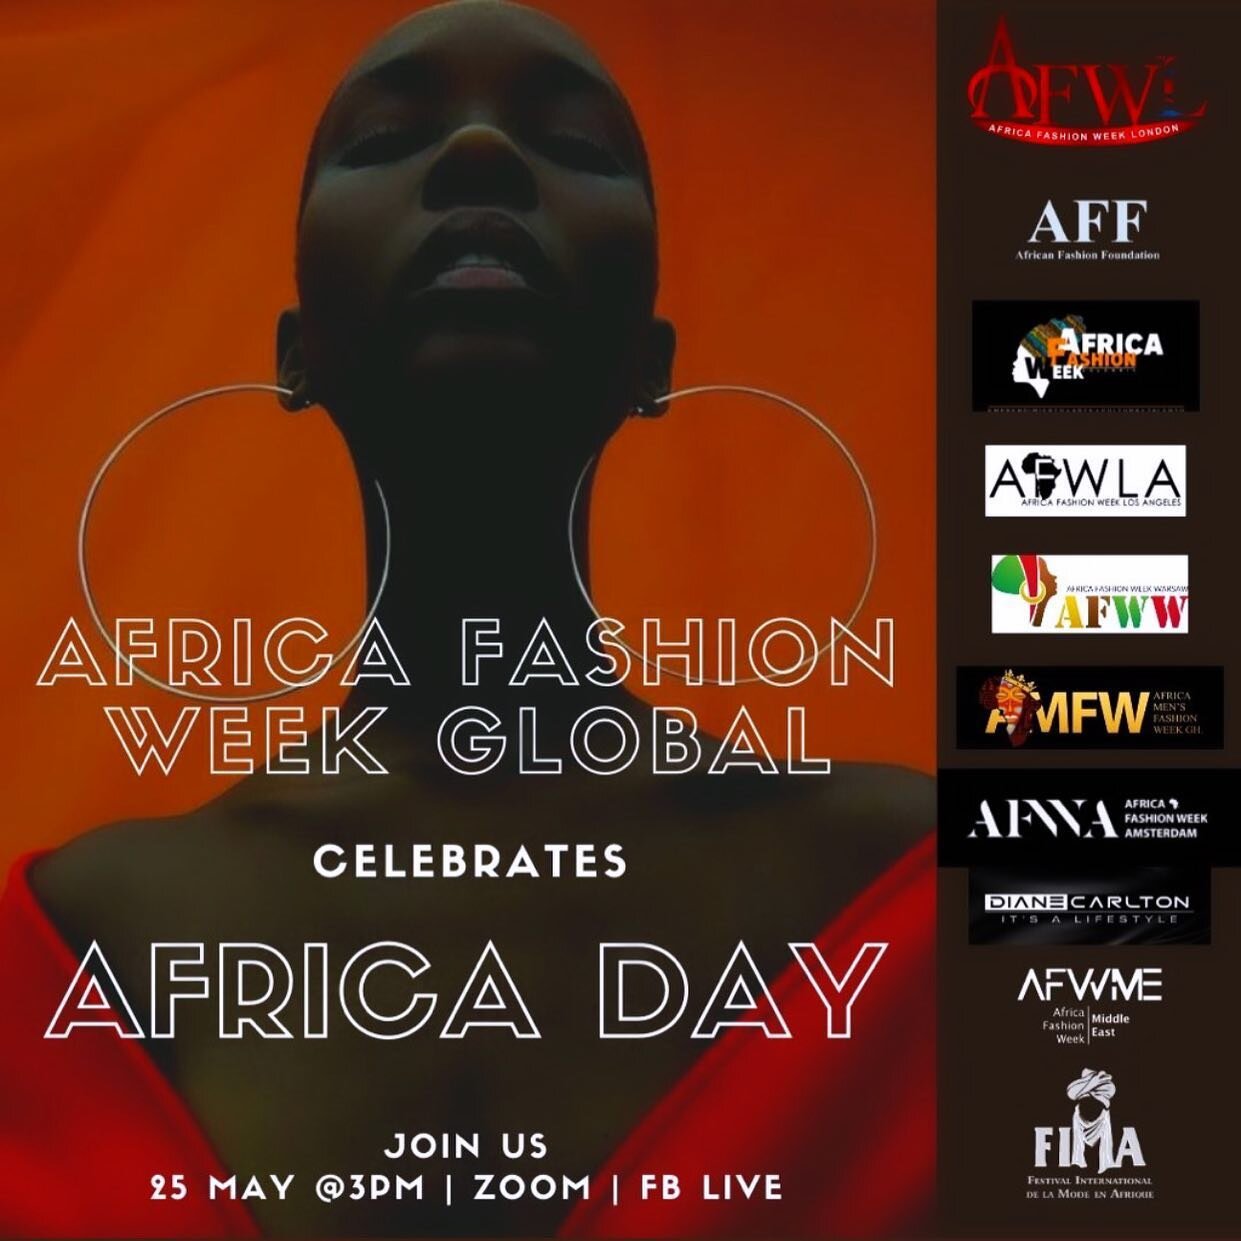 In honor of Africa Day, tomorrow 25 May, Africa Fashion Week Los Angeles is excited to take part in the first @zoom_video_communications meet-up of the founders of other Africa Fashion Weeks around the world, hosted by @afwlondon . In attendance will